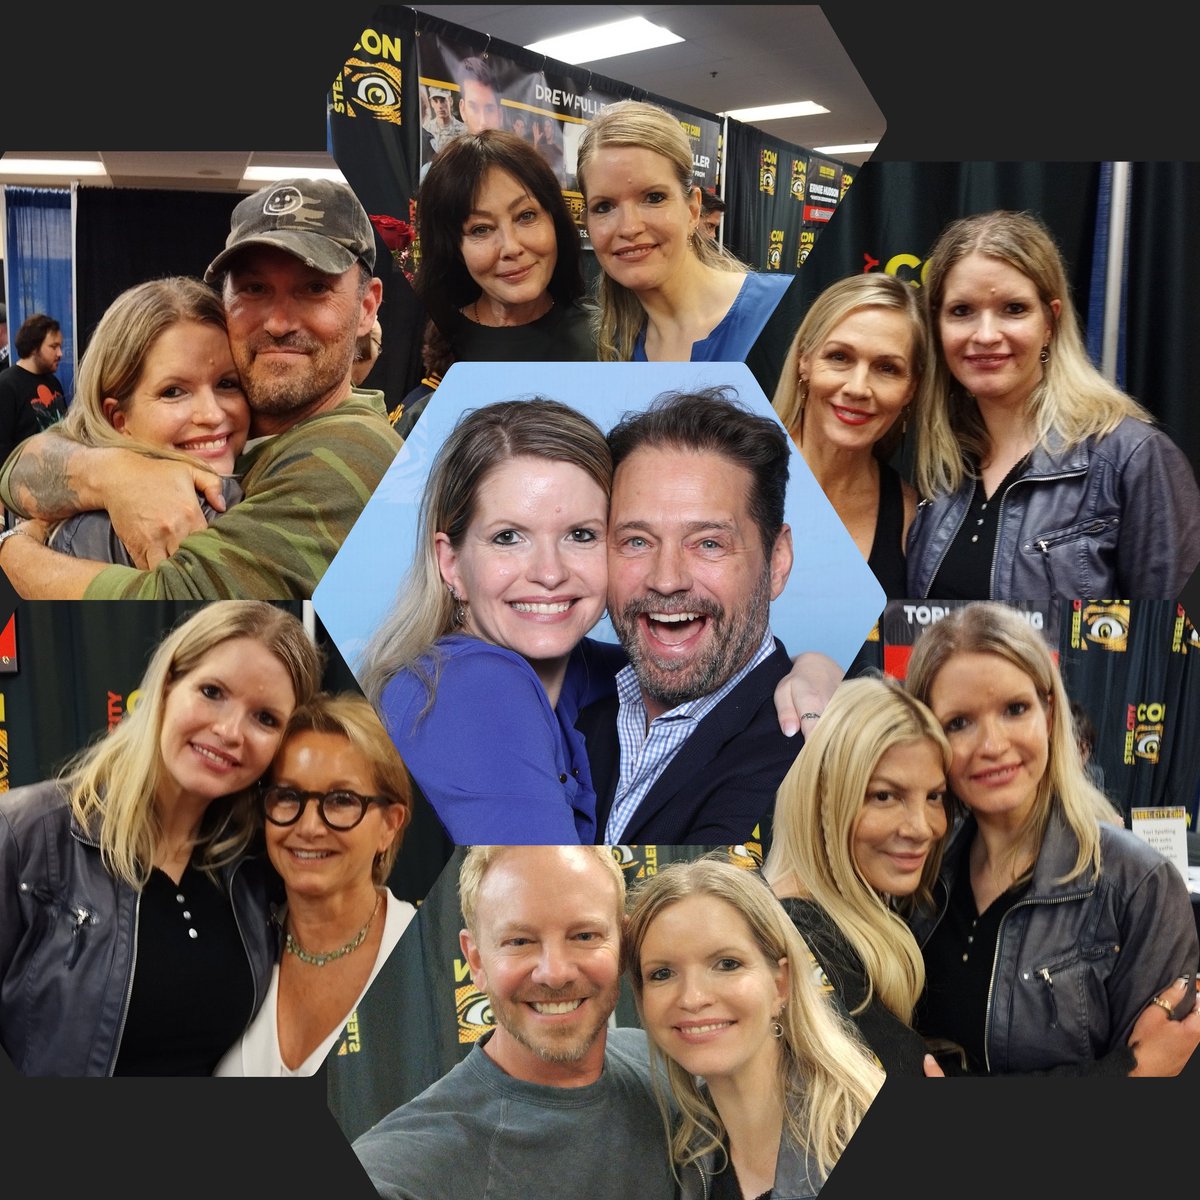 Reunited w/all of my #beverlyhills90210 Babies at #steelcitycon 😍❤️‍🔥
#jasonpriestley #jenniegarth #ianziering #brianaustingreen #shannendoherty #torispelling gabriellecarteris #bh90210 #charmed #privateeyes #wildcards luckyme #convention  
Once a 90210 Girl, ALWAYS a 90210 Girl❤️‍🔥